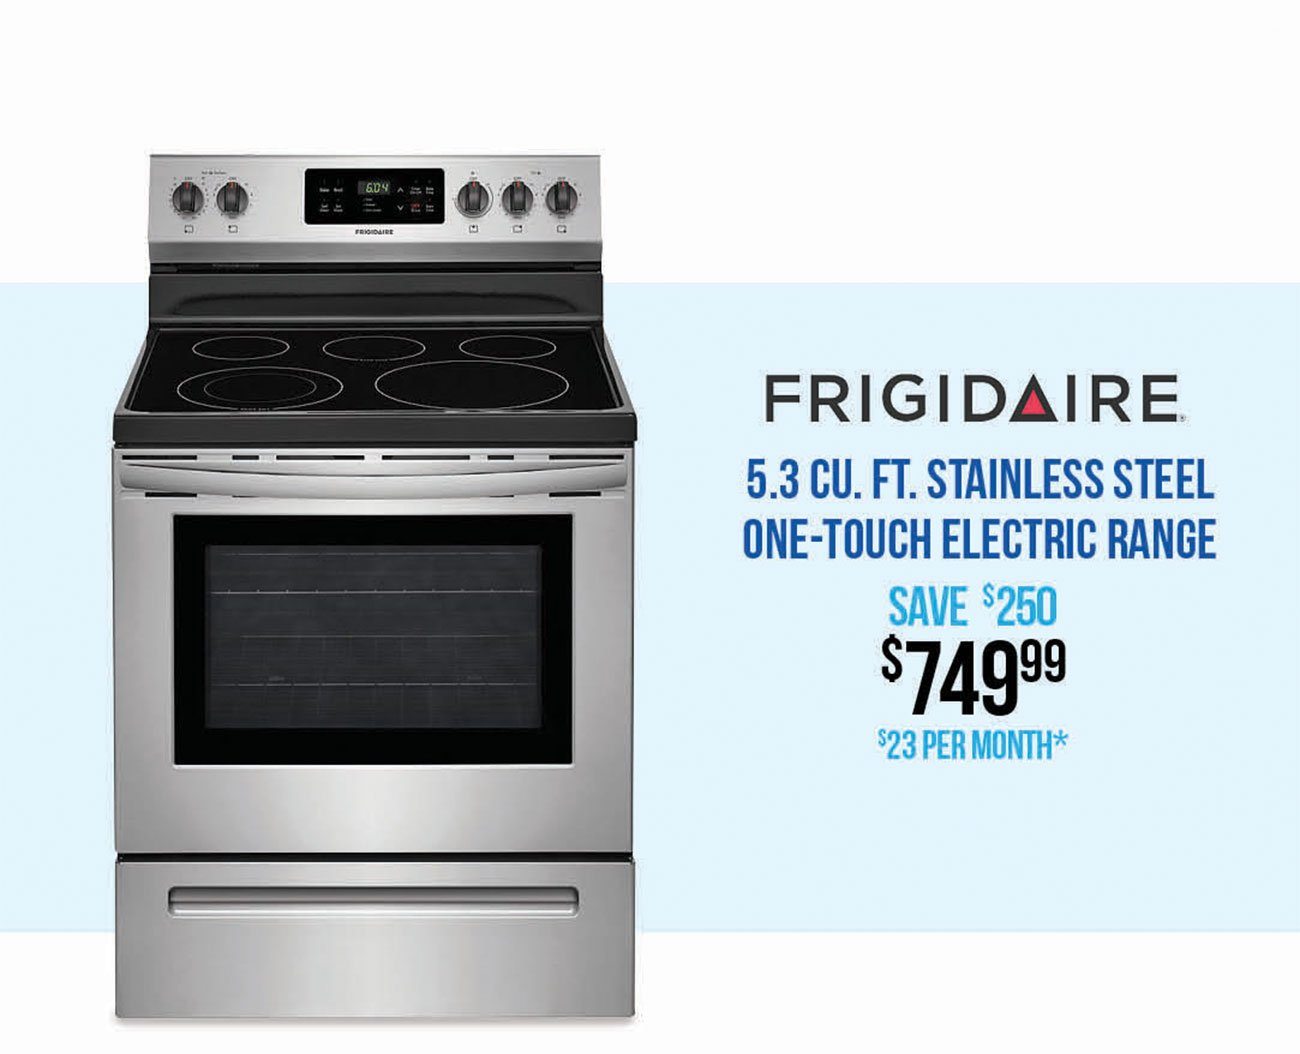 Frigidaire-Stainless-Steel-Electric-Range-UIRV